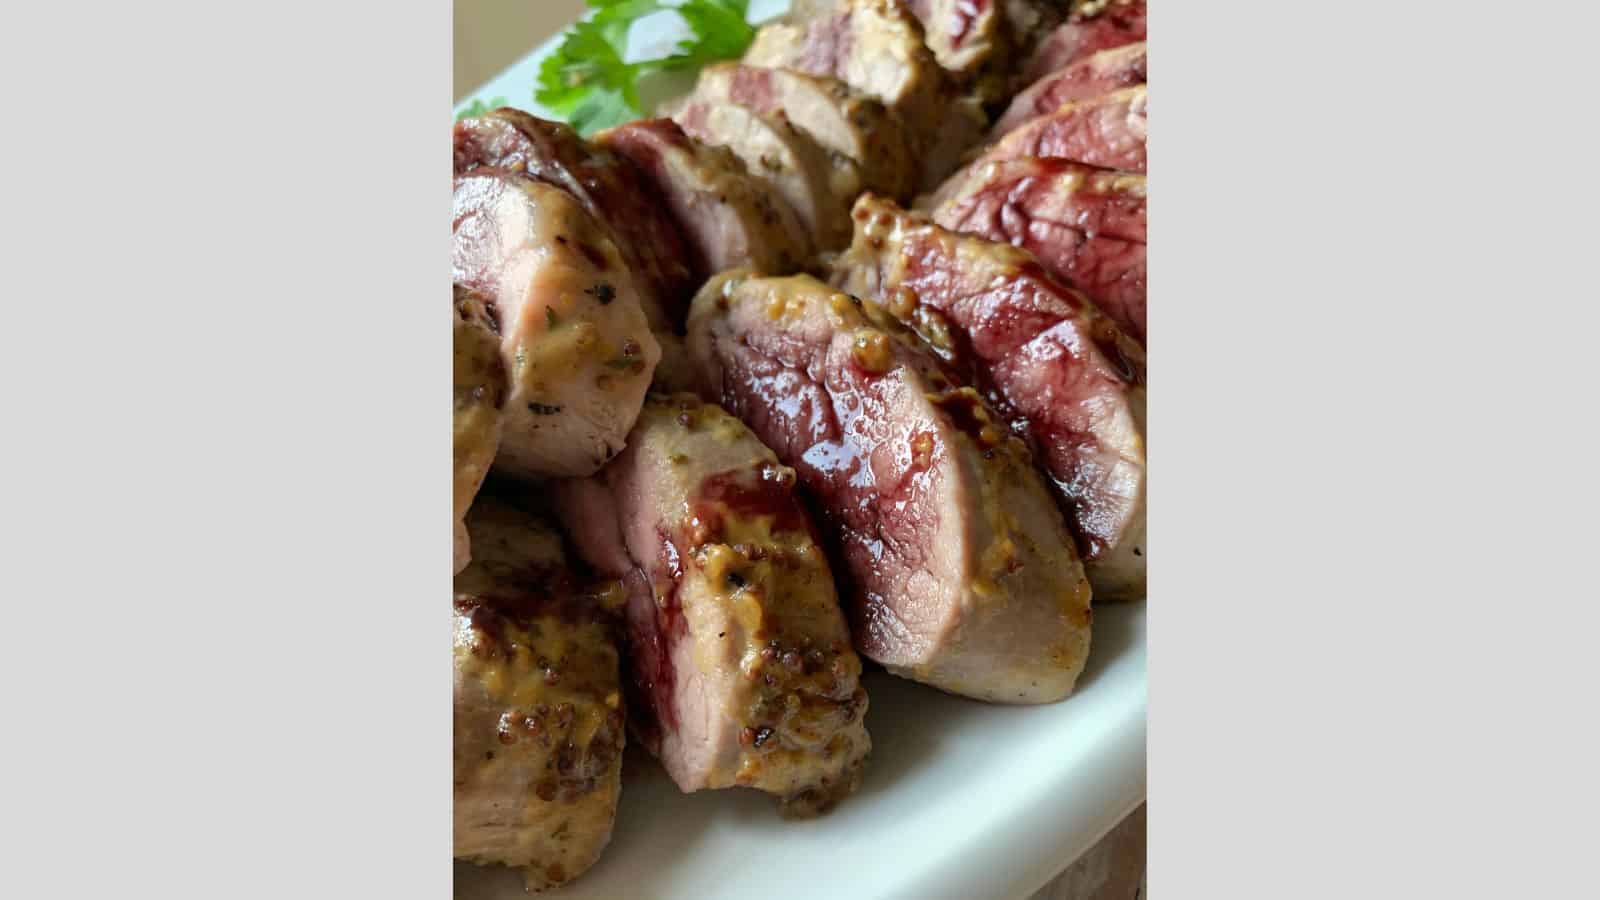 A platter with sliced pork tenderloin medallions drizzled with a red wine sauce.